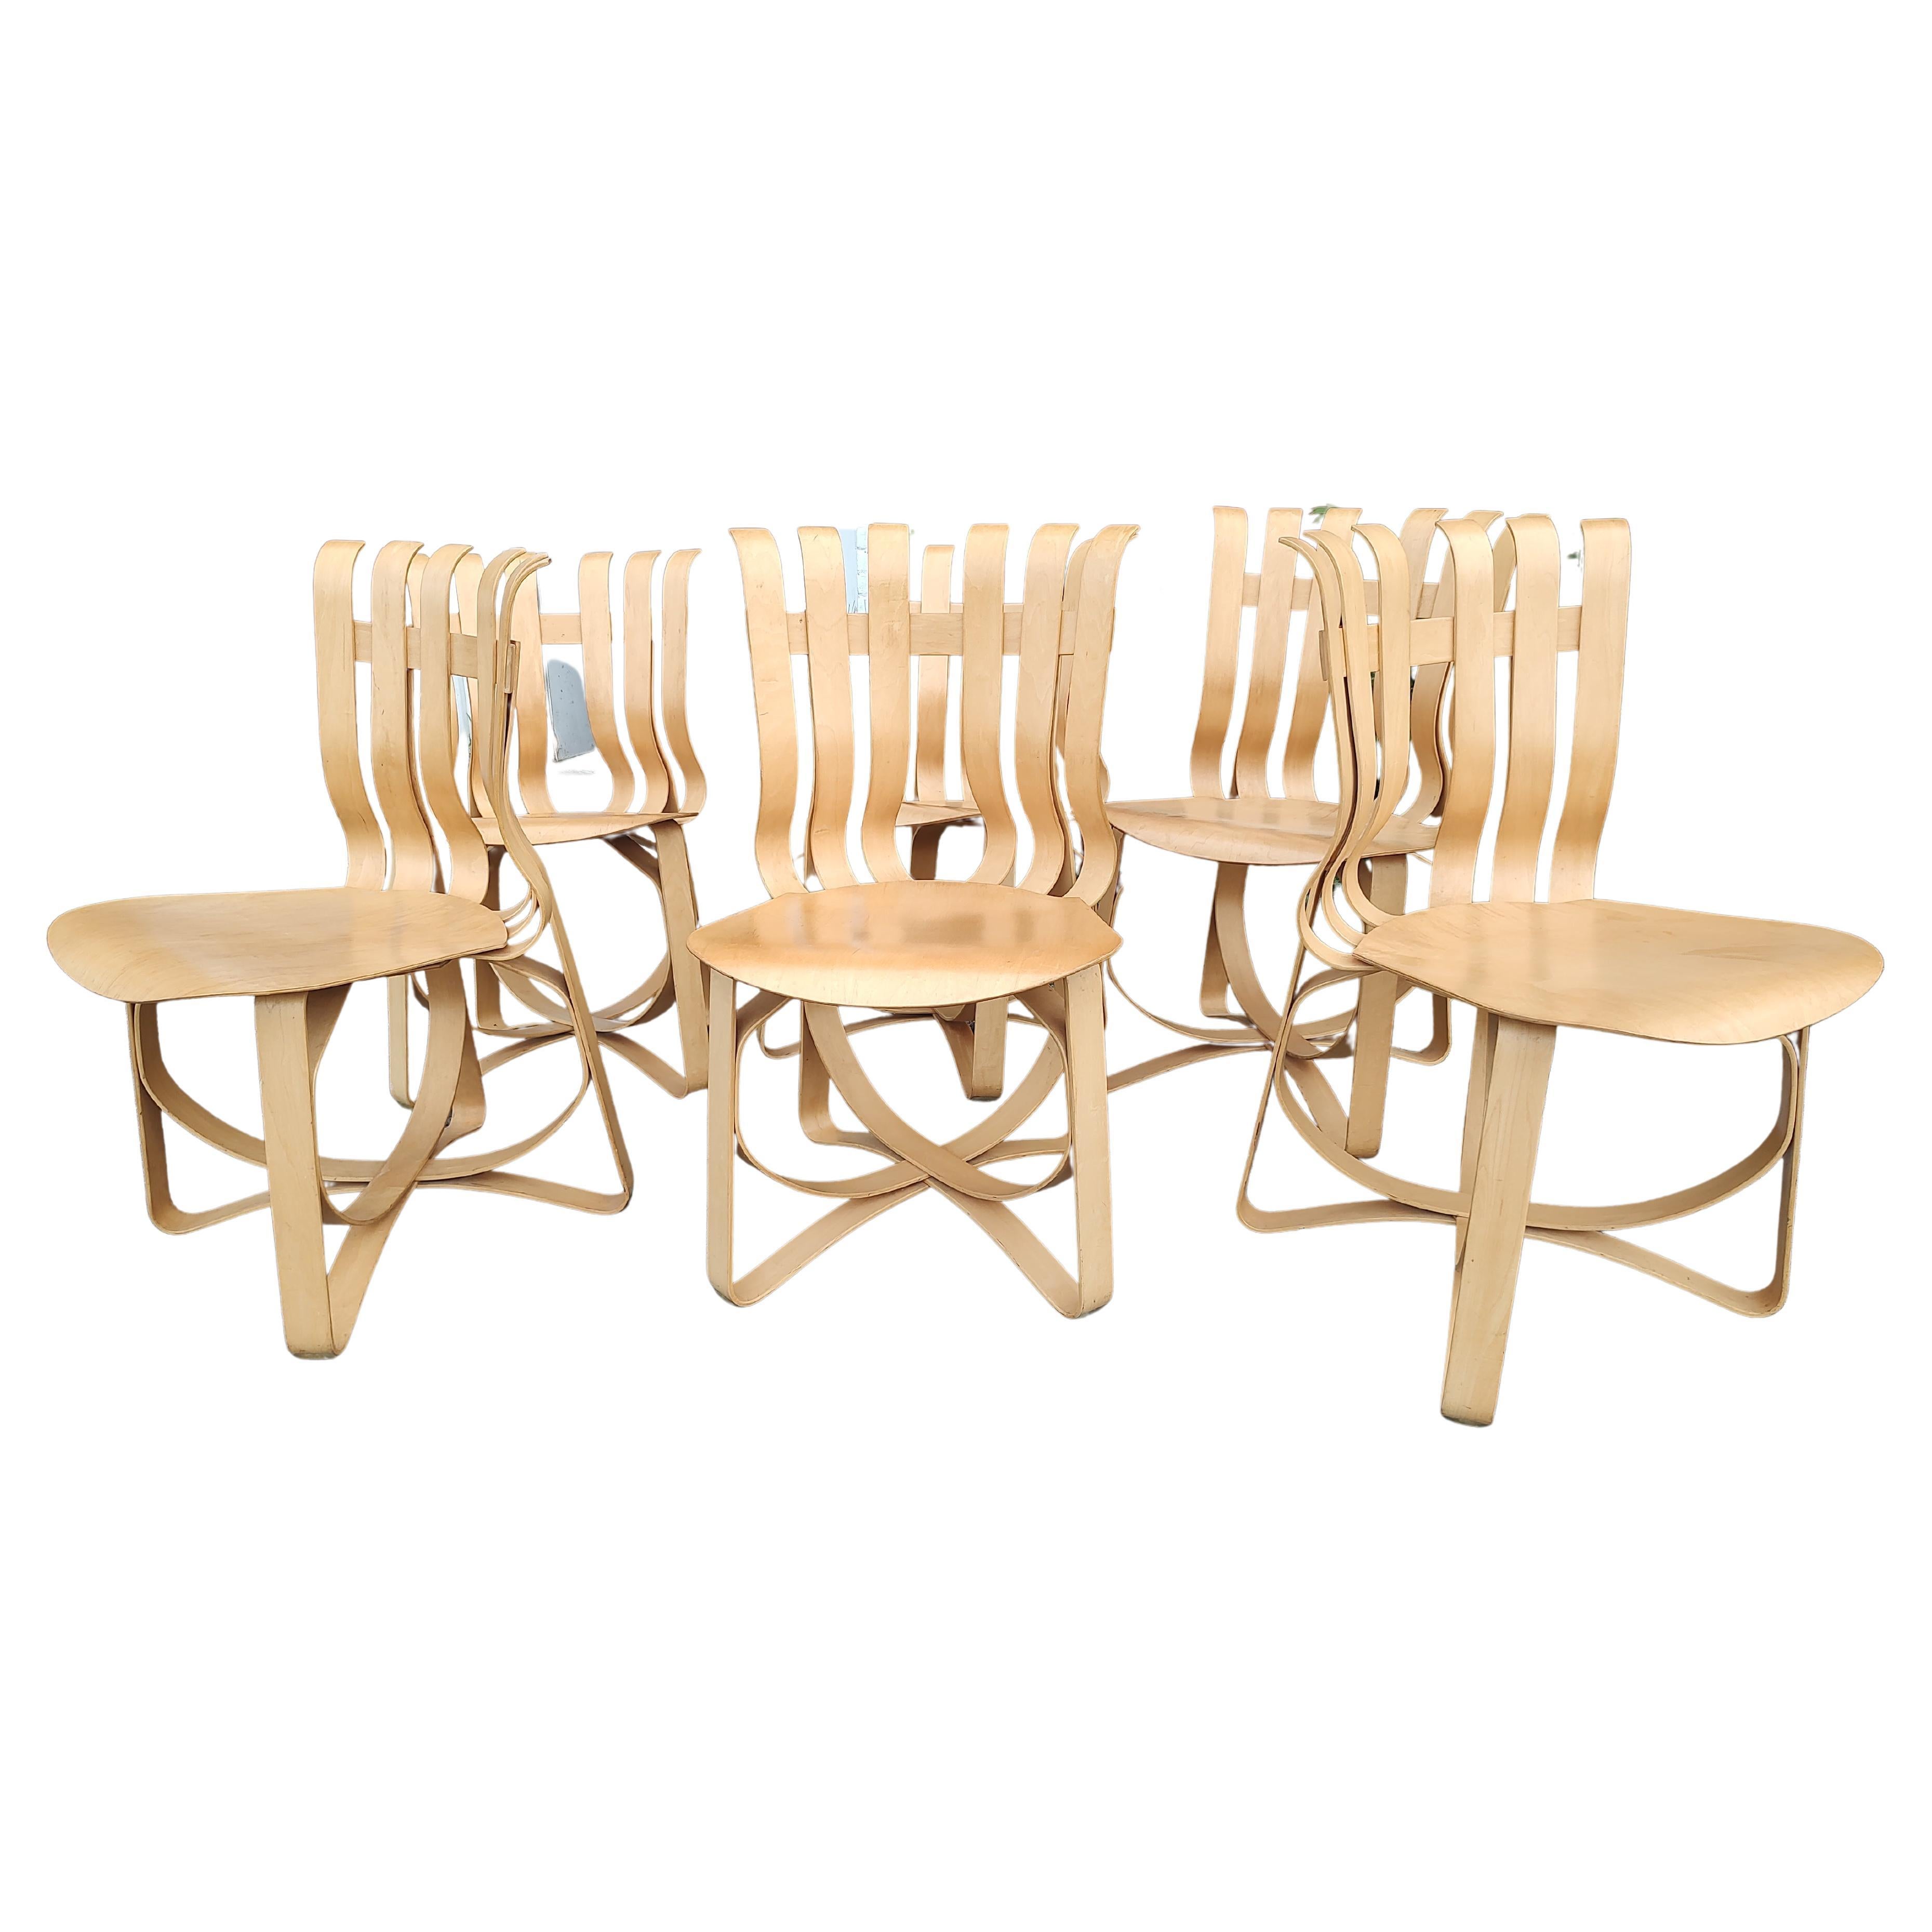 Late 20th Century Mid Century Modern Sculptural Birch 6 Hat Trick Chairs by Frank Gehry - Knoll For Sale